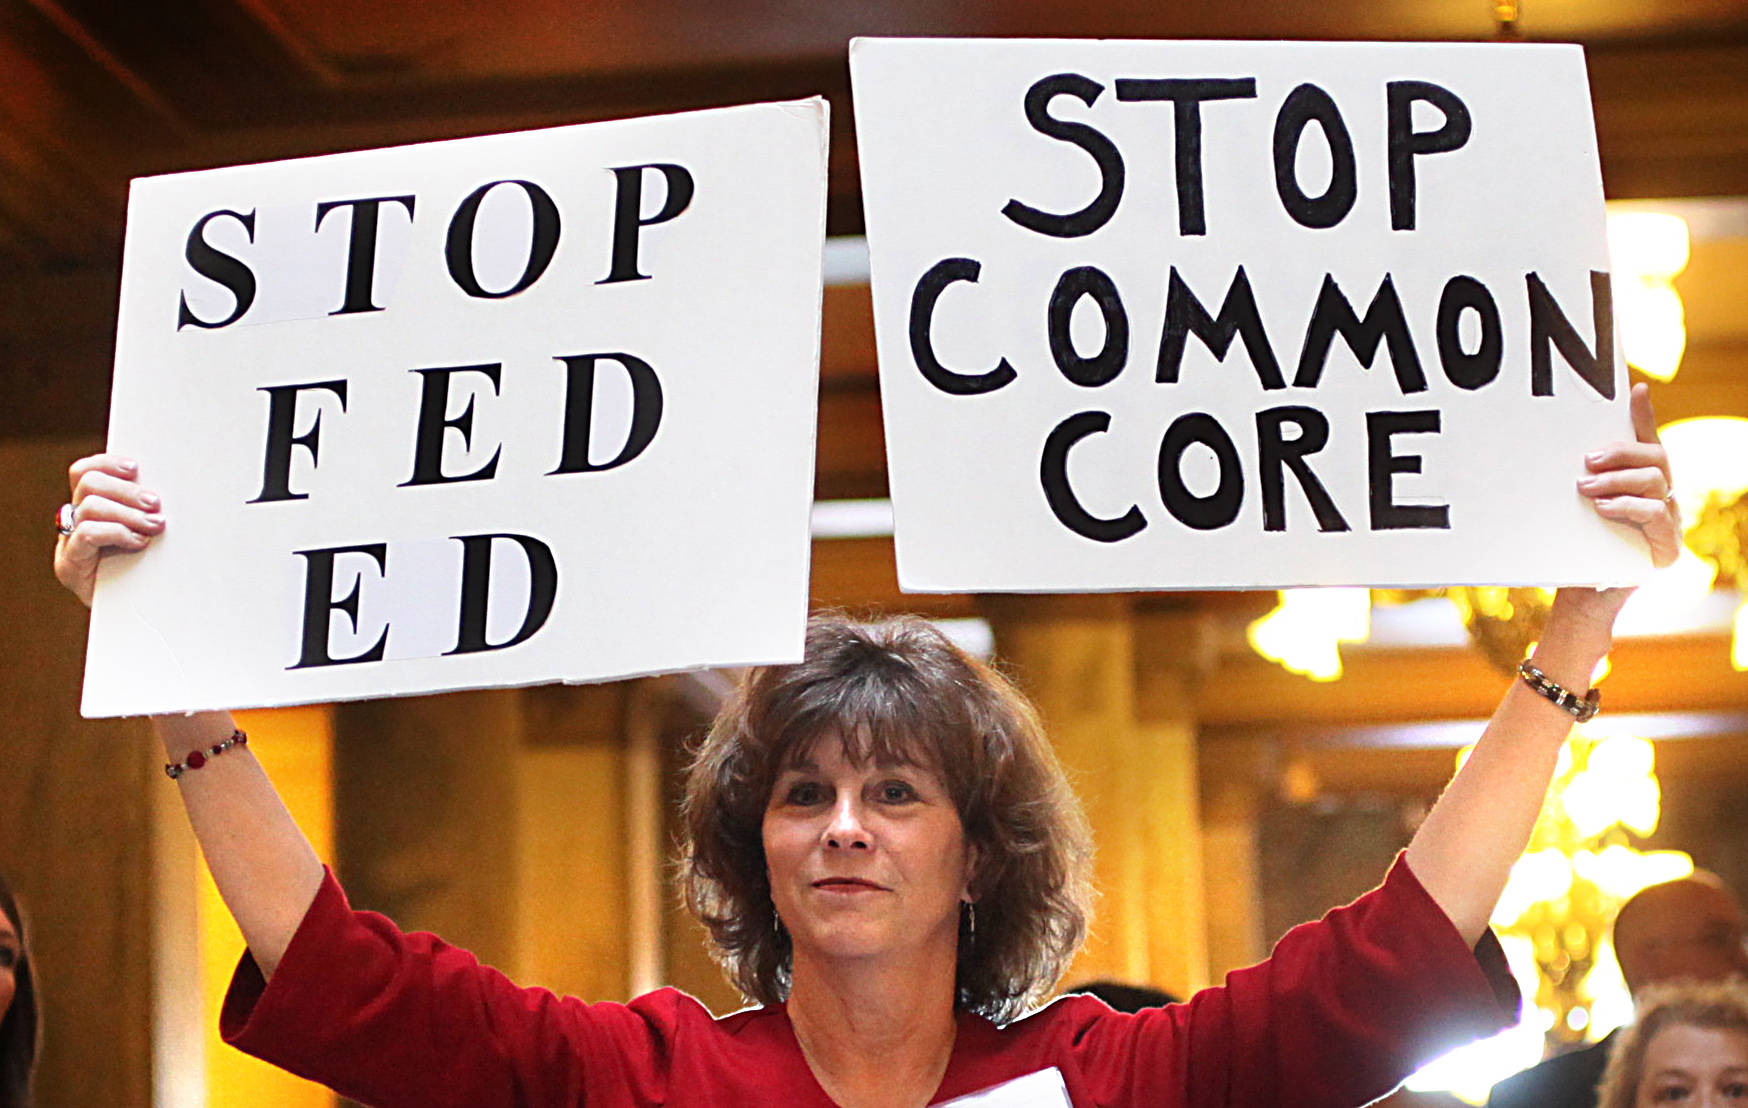 Concerned grandparent Sue Lile, of Carmel, Ind., shows her opposition to Common Core standards during a January rally at the State House rotunda in Indianapolis.